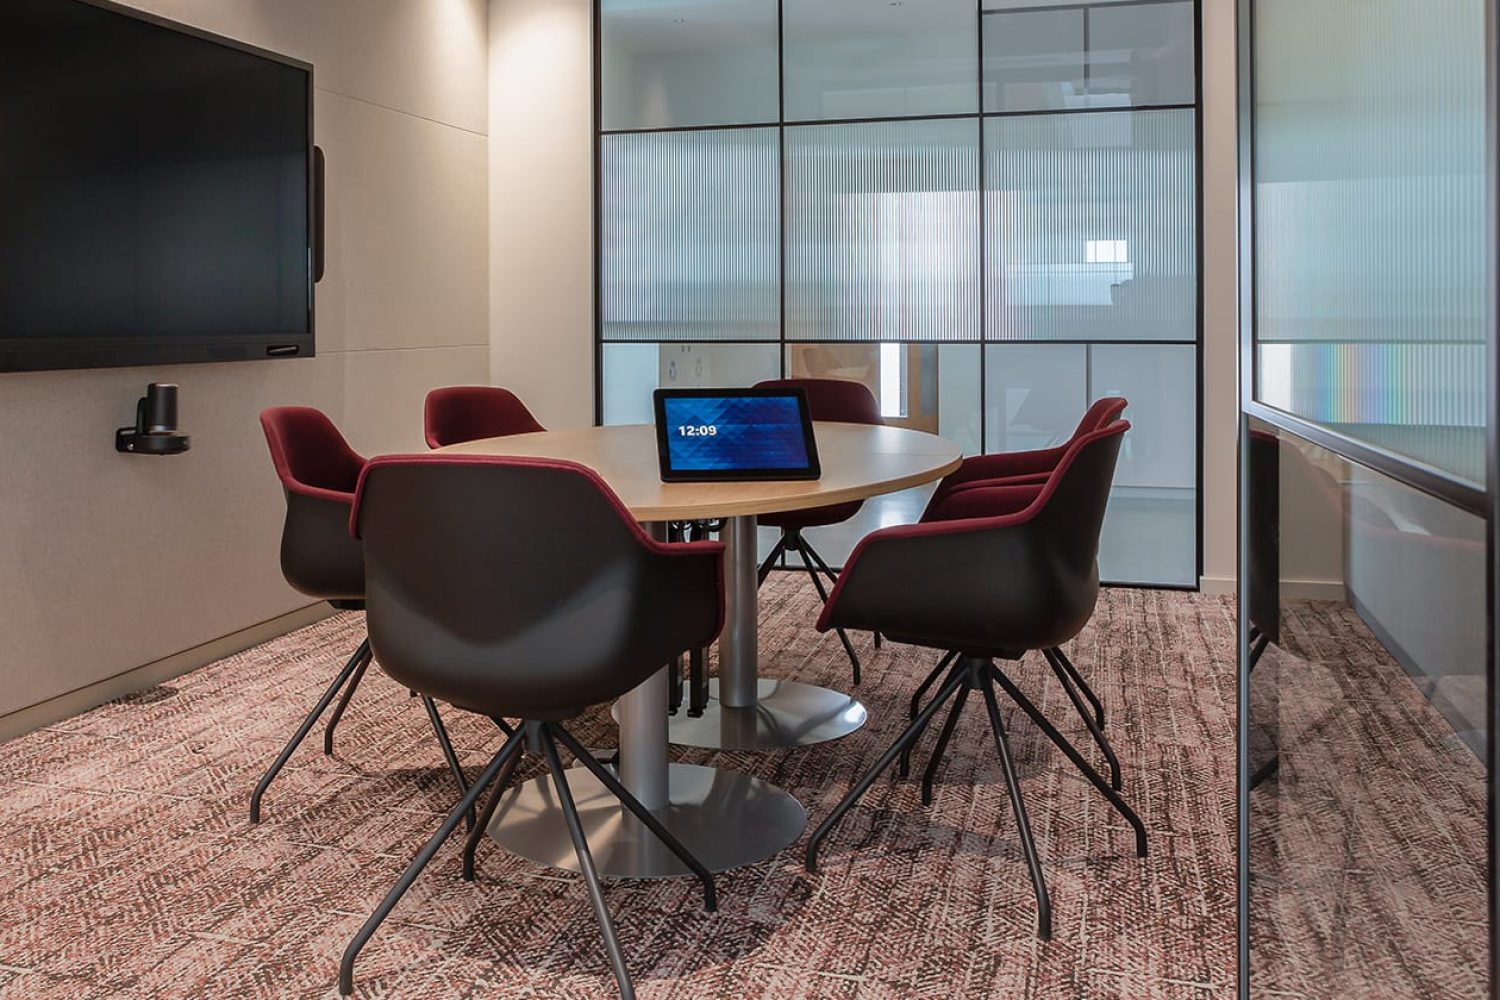 A conference room with a large table and office desk chairs.